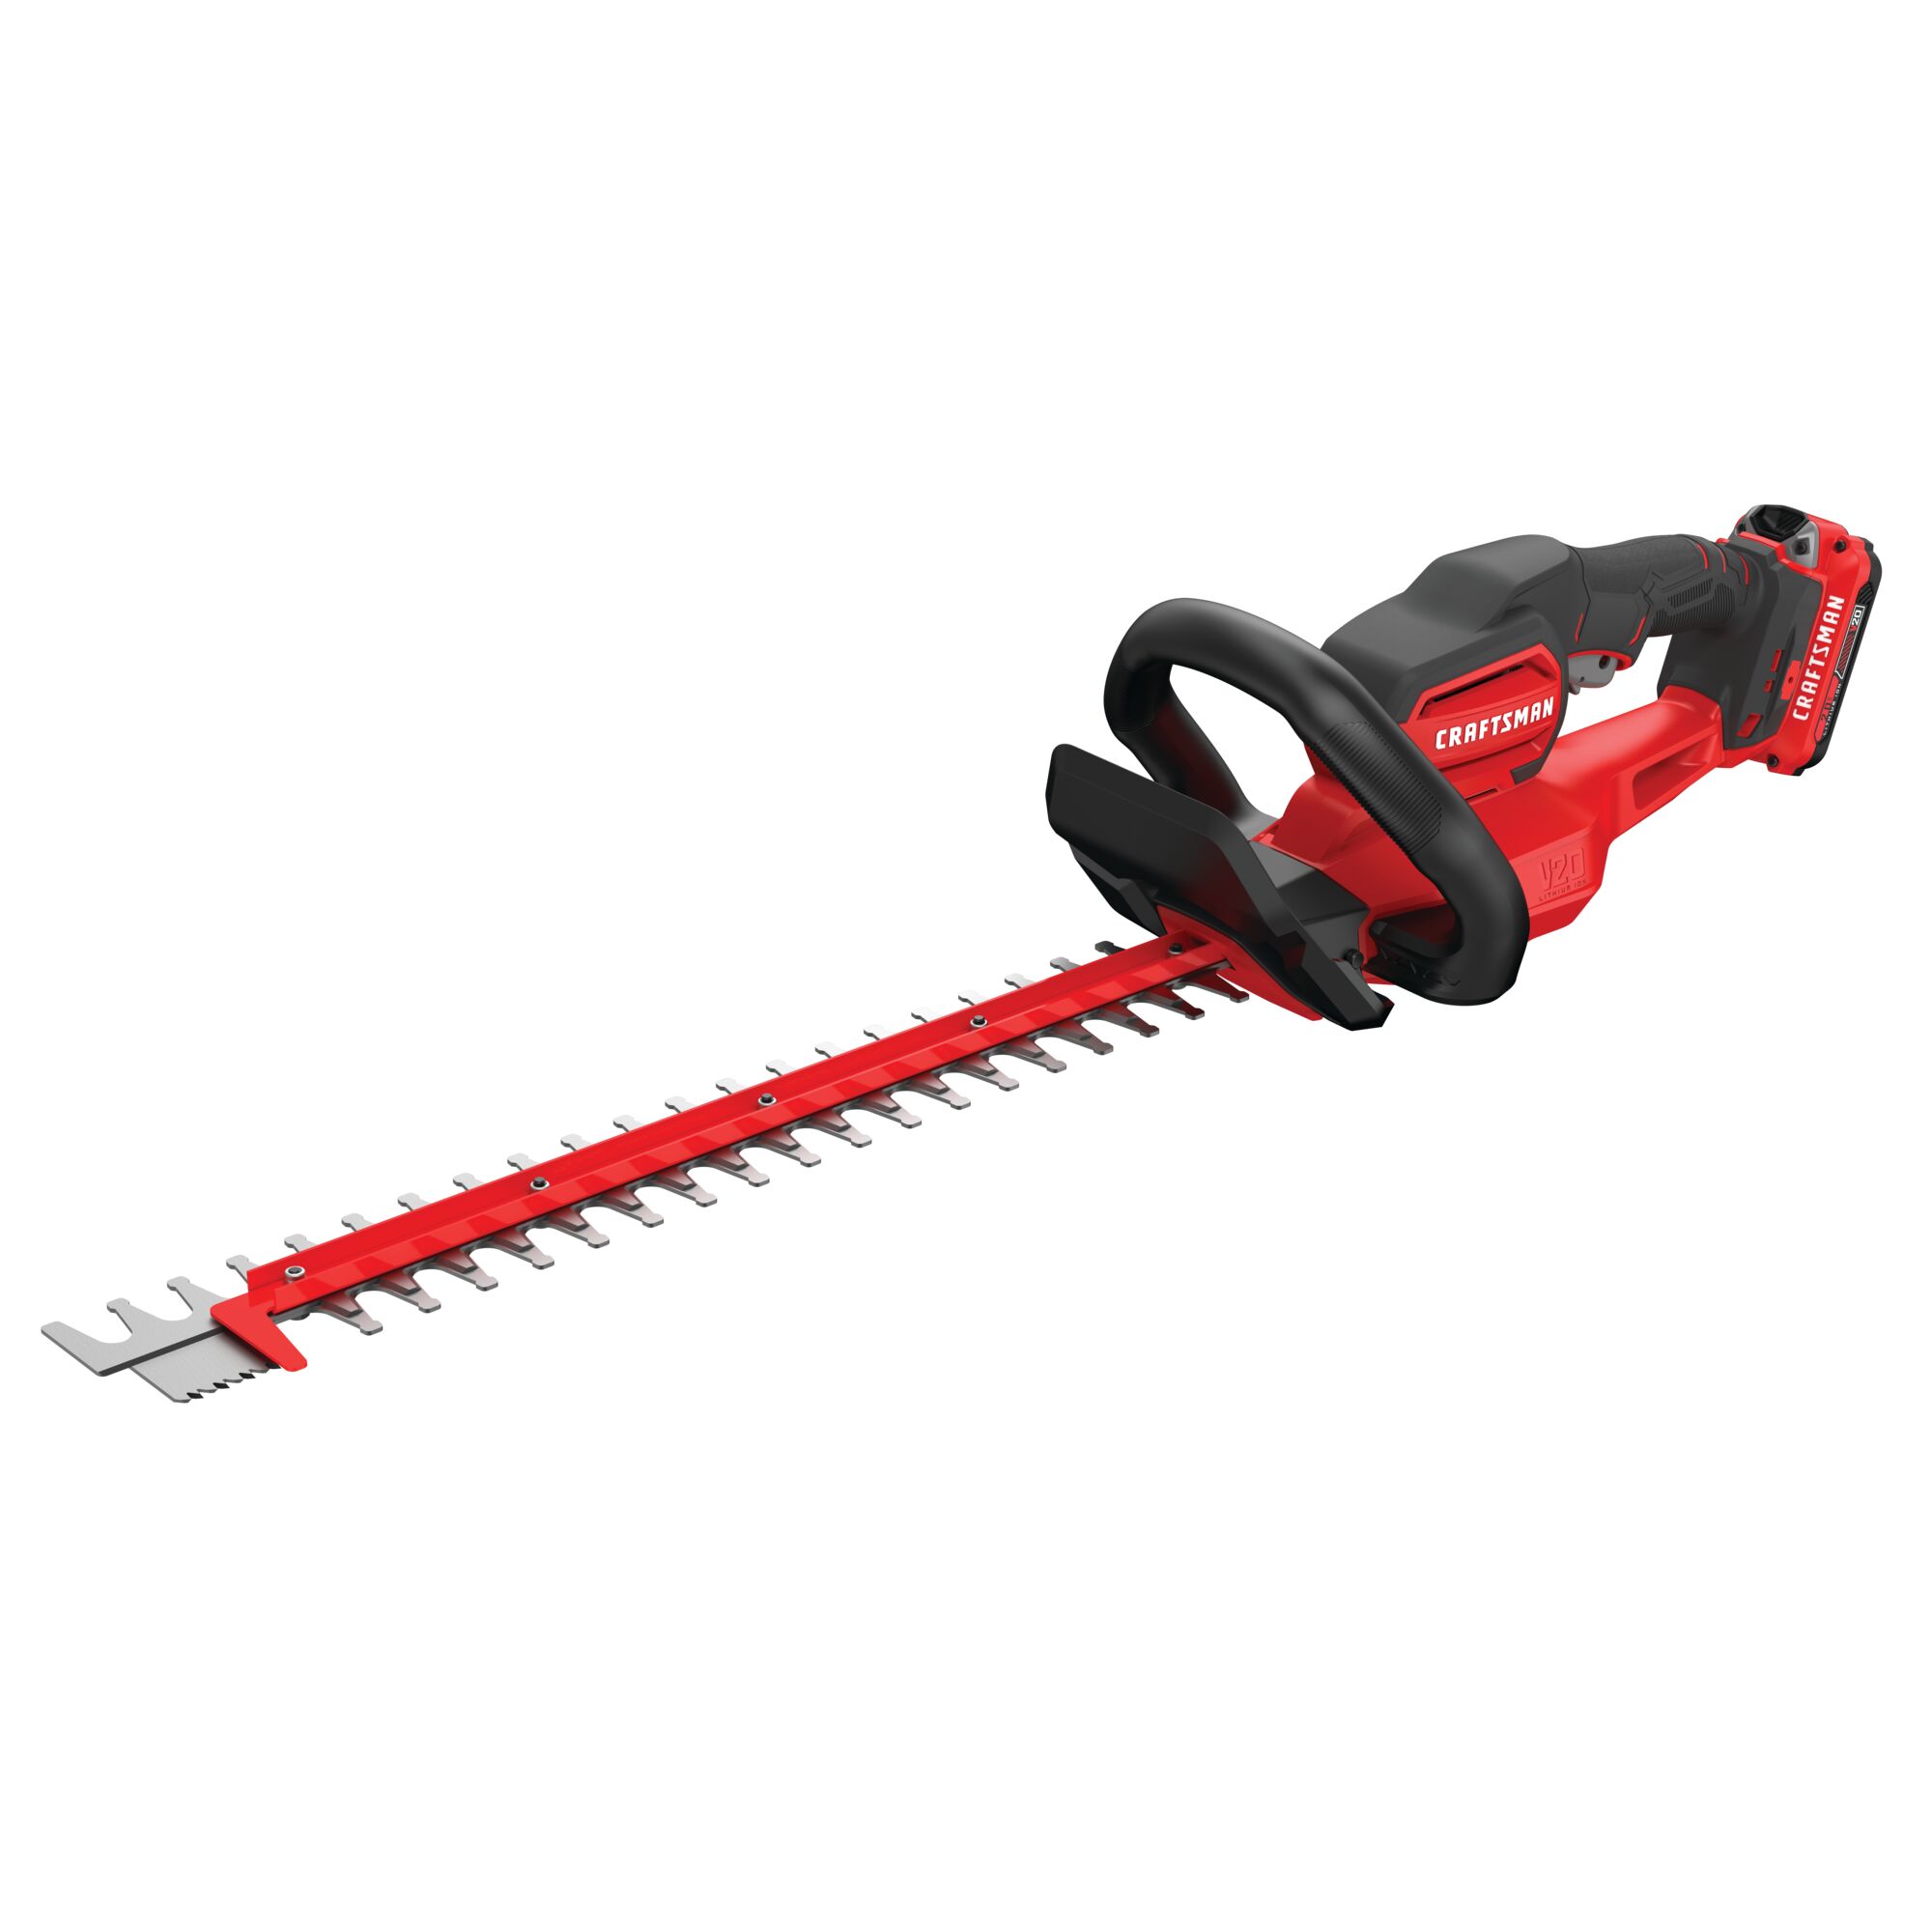 Cordless 22 inch hedge trimmer kit 2 ampere hours.